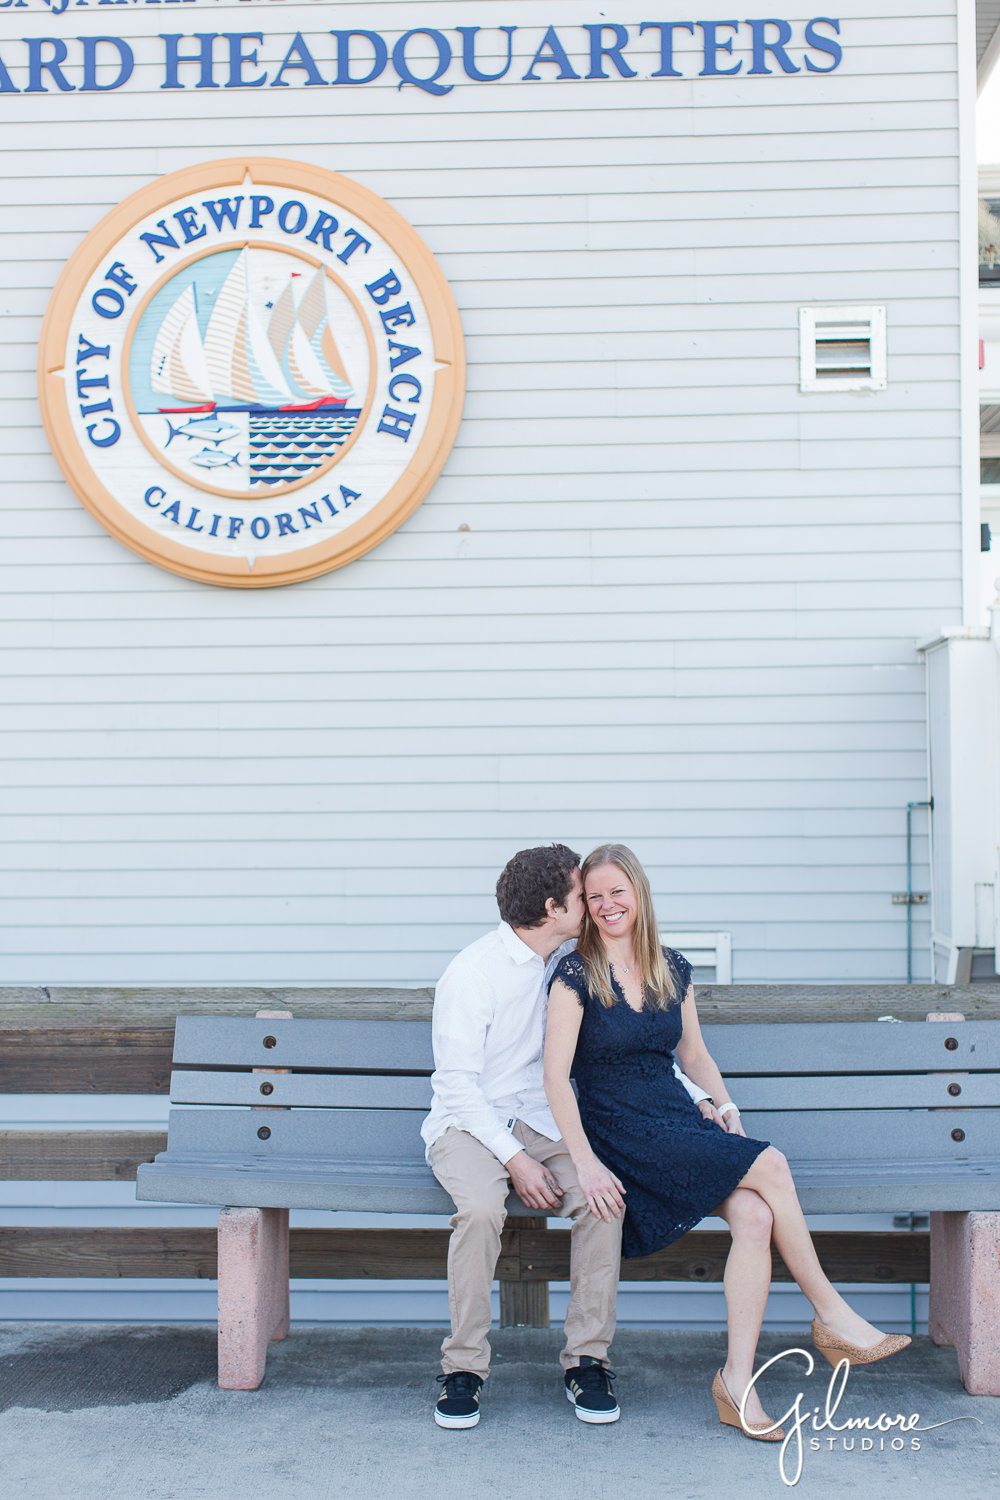 Engagement Photography Session at the beach, lifeguard headquarters